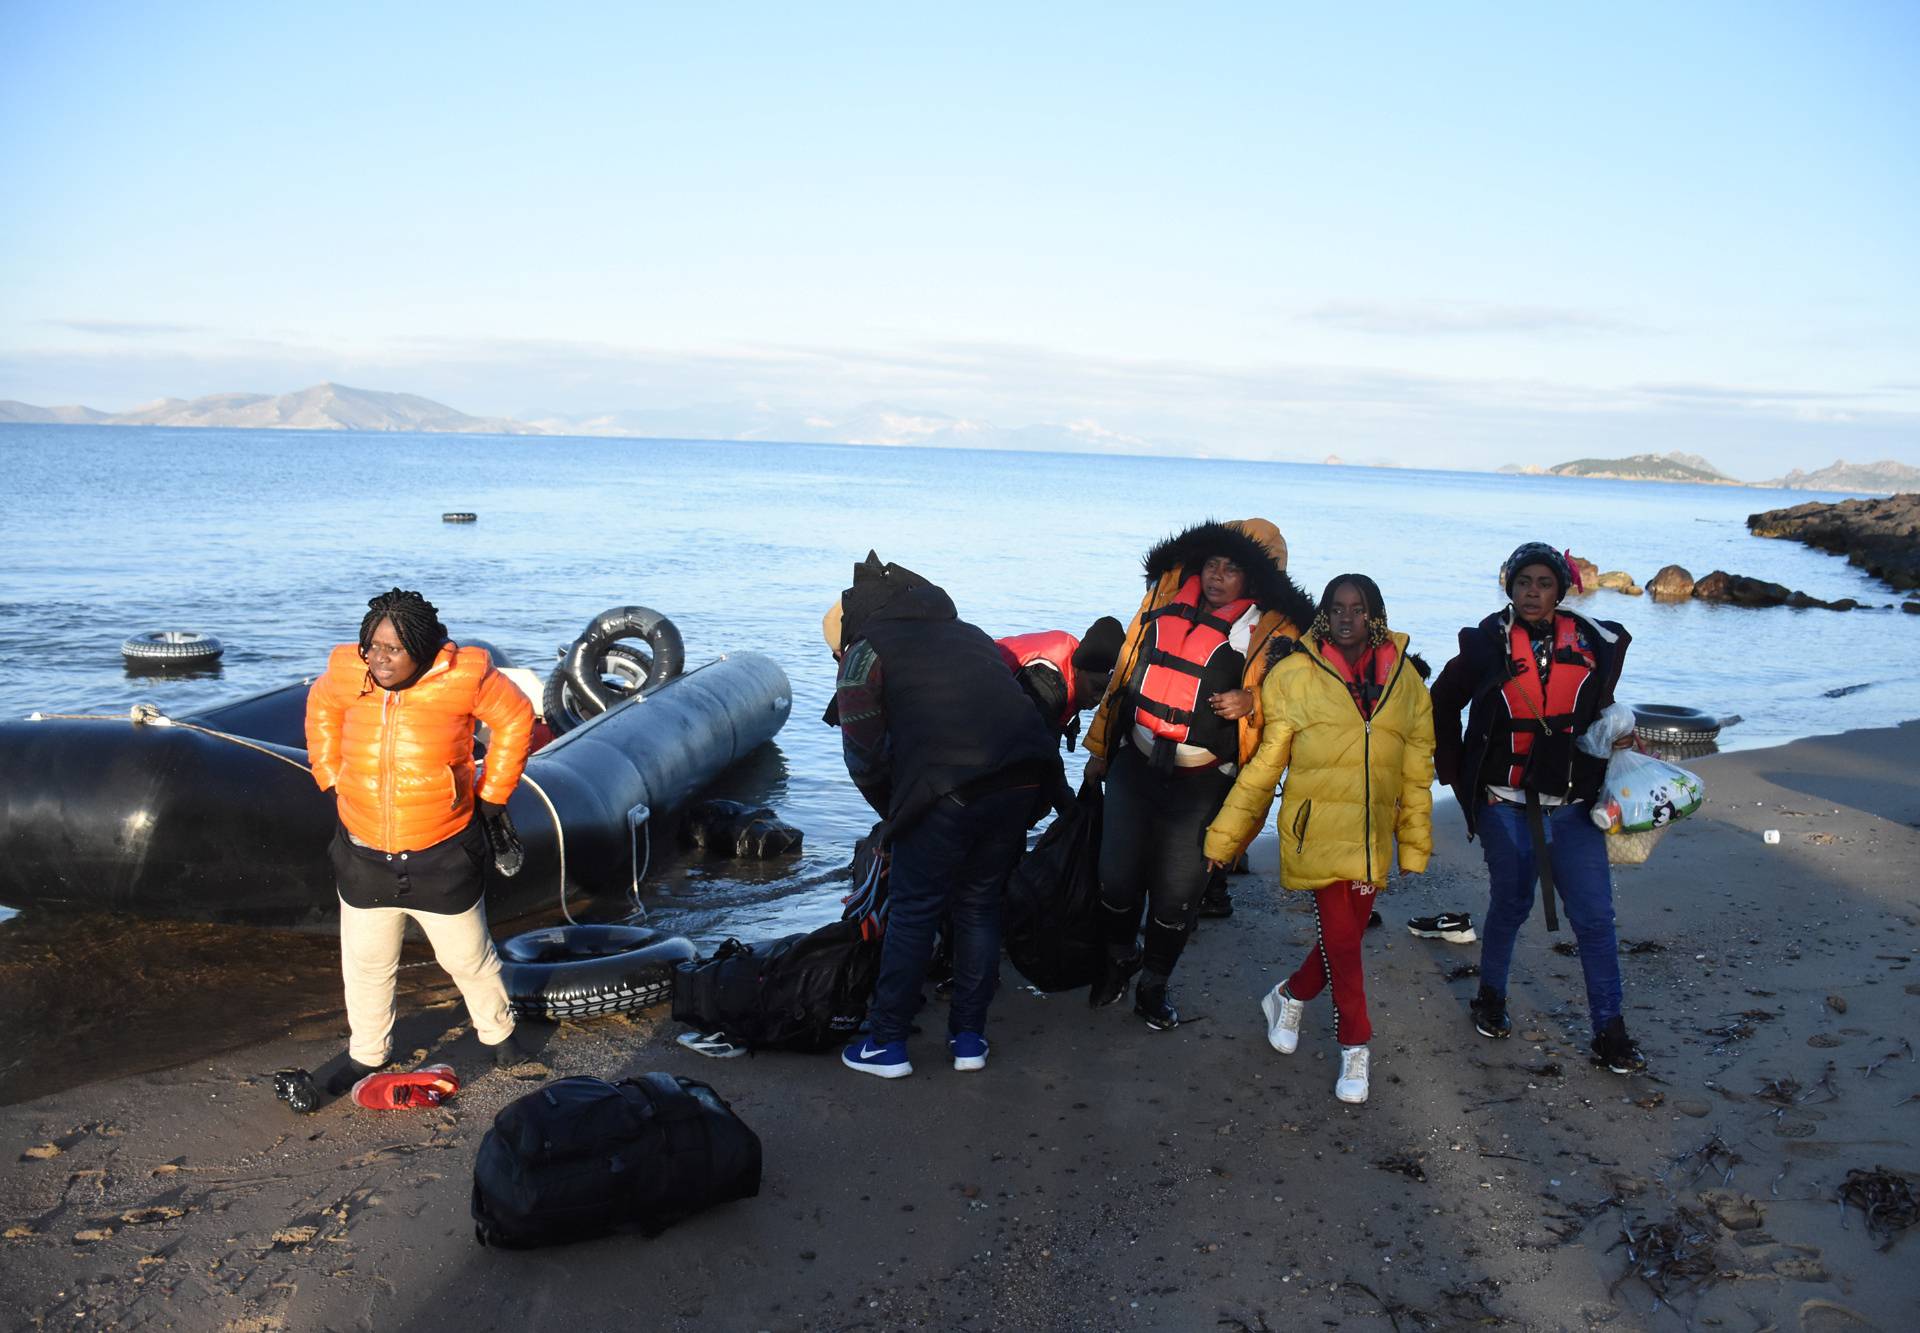 Migrants return to Turkish coastline after an unsuccessful attempt to reach the Greek island of Kos, in Bodrum